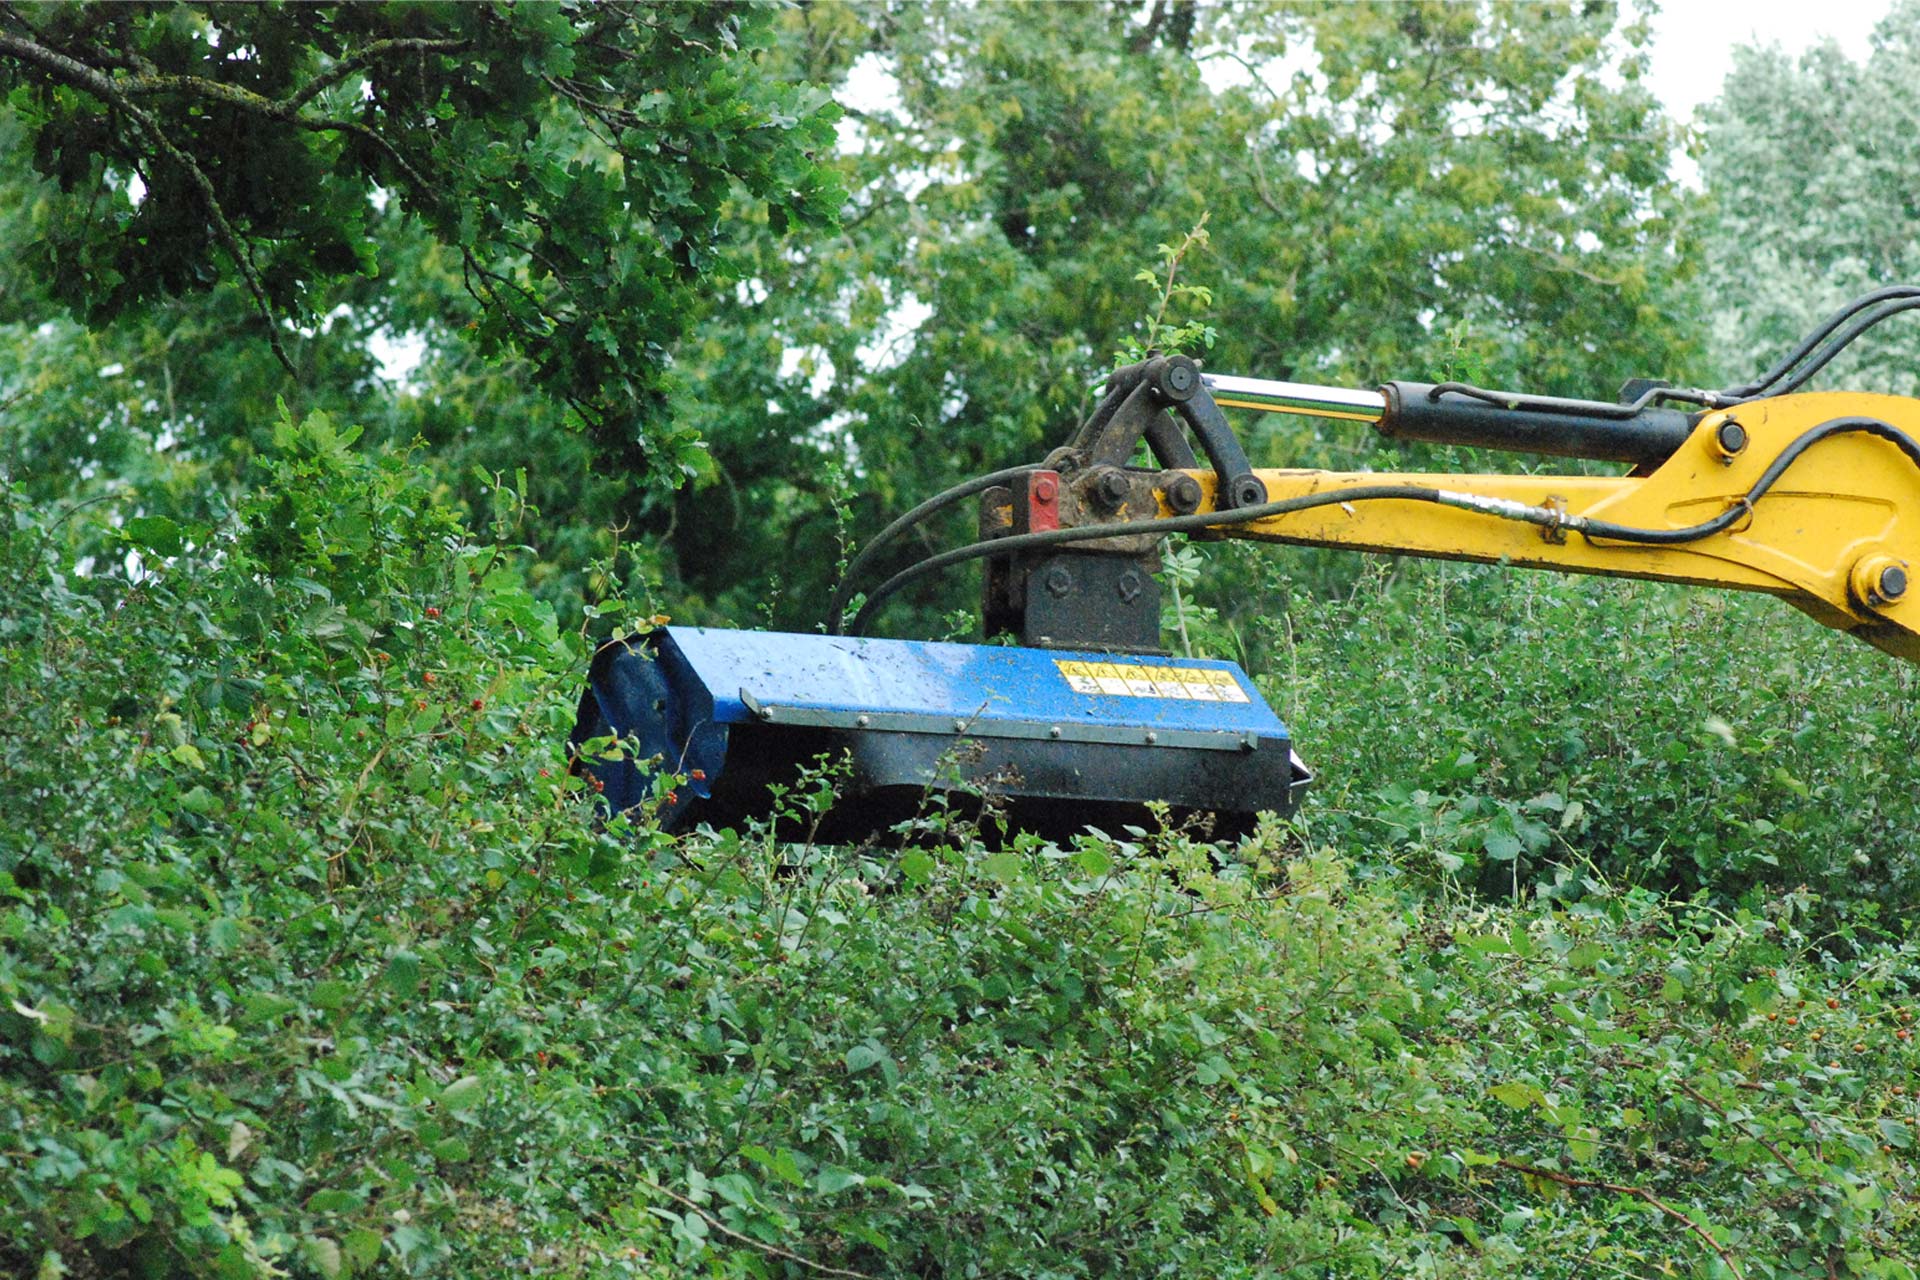 Blue Robustrack flail cutting a hedge top